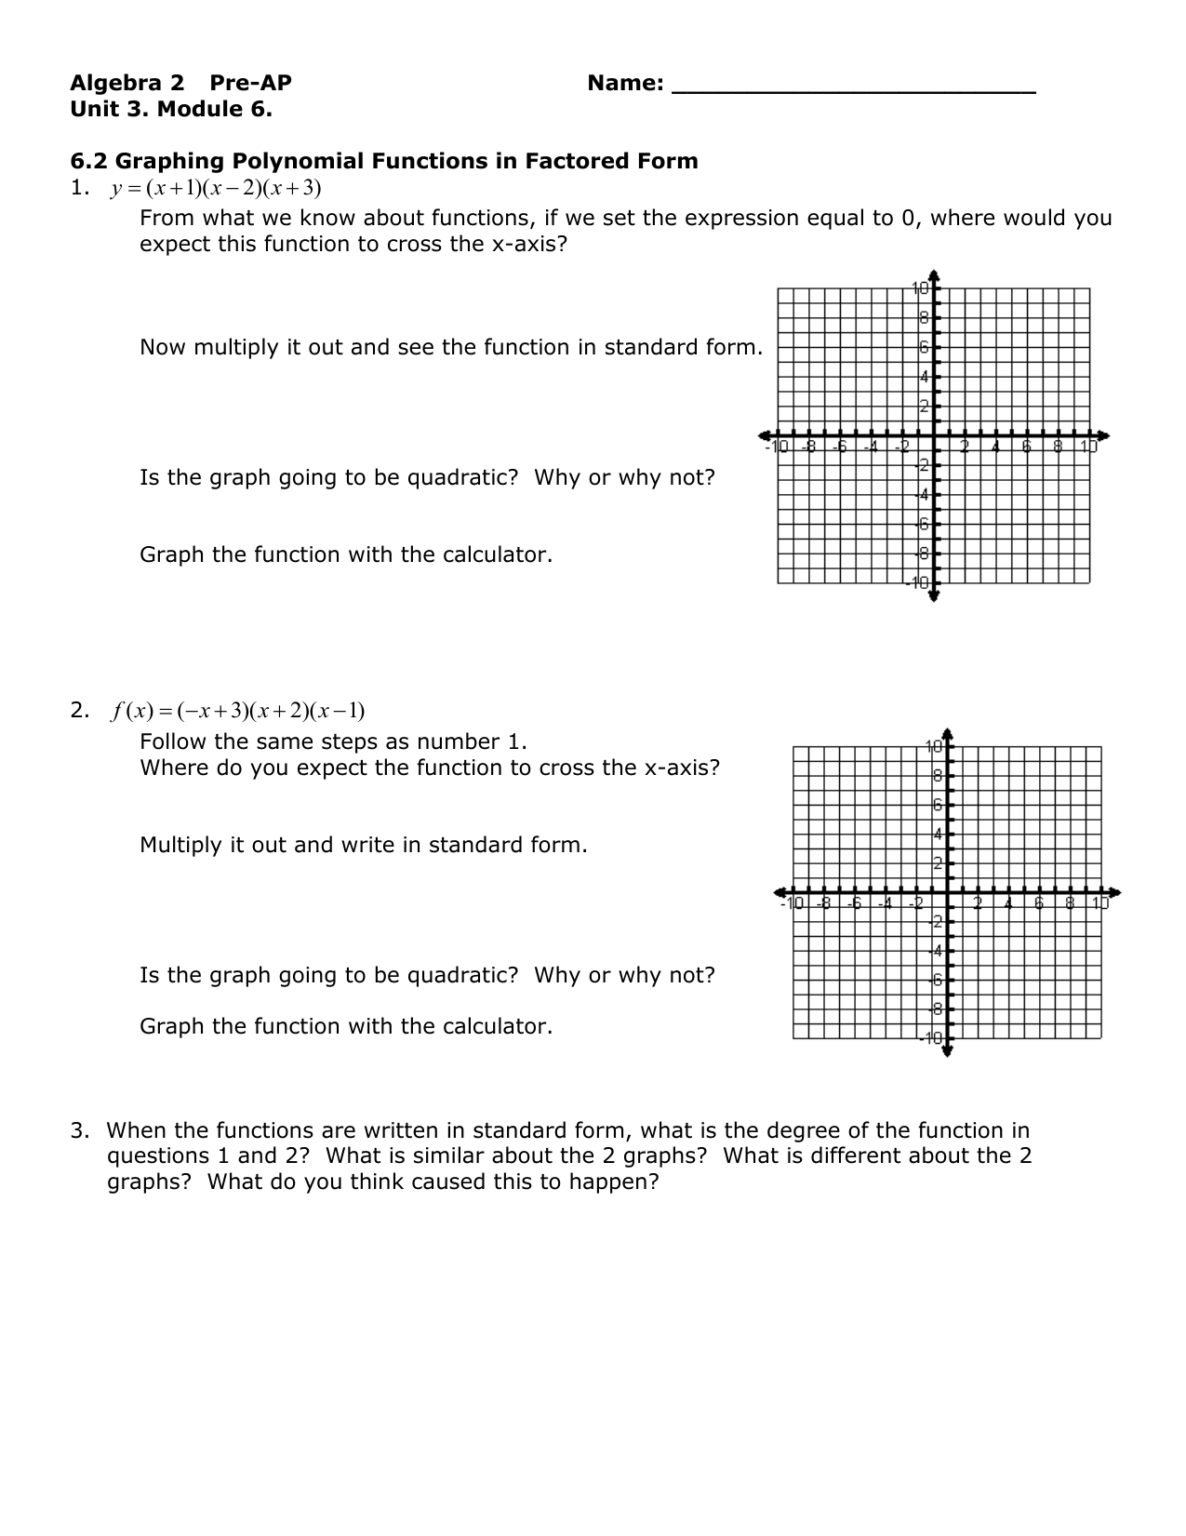 graphing-polynomial-functions-in-factored-form-worksheet-pdf-function-worksheets